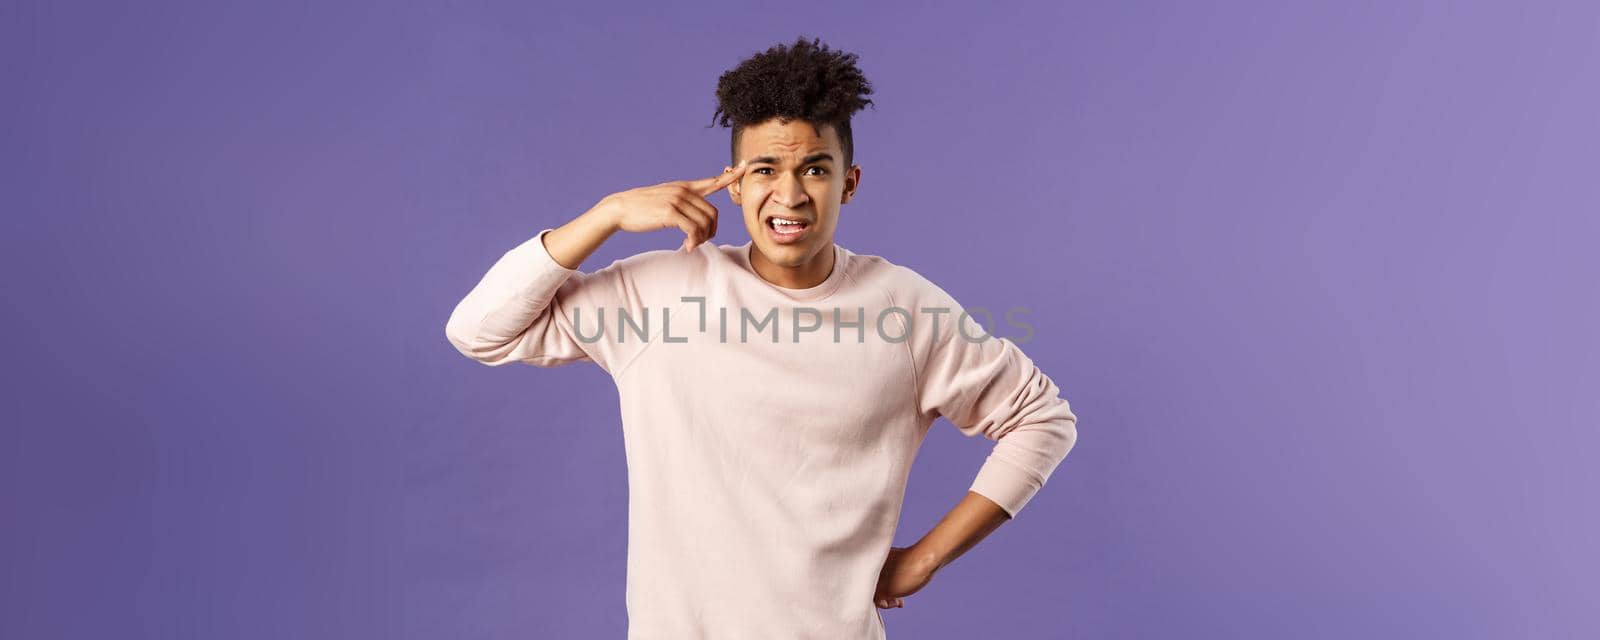 Portrait of angry, annoyed young man scolding someone from being stupid and crazy, rolling index finger over temple staring outraged and irritated camera, standing bothered purple background.